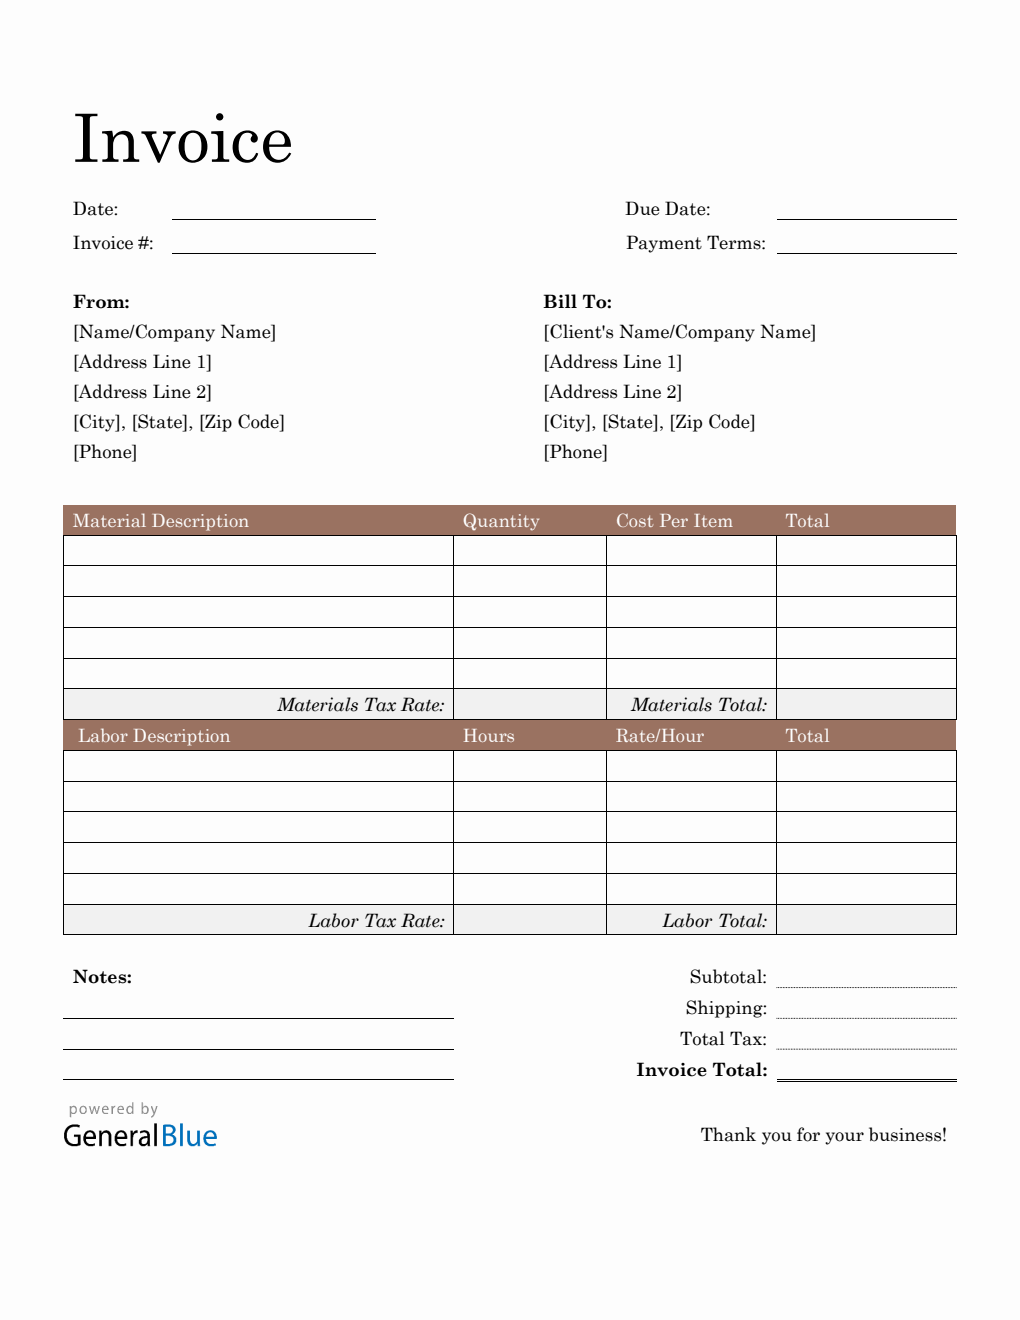 Construction Invoice Template in Word (Basic)